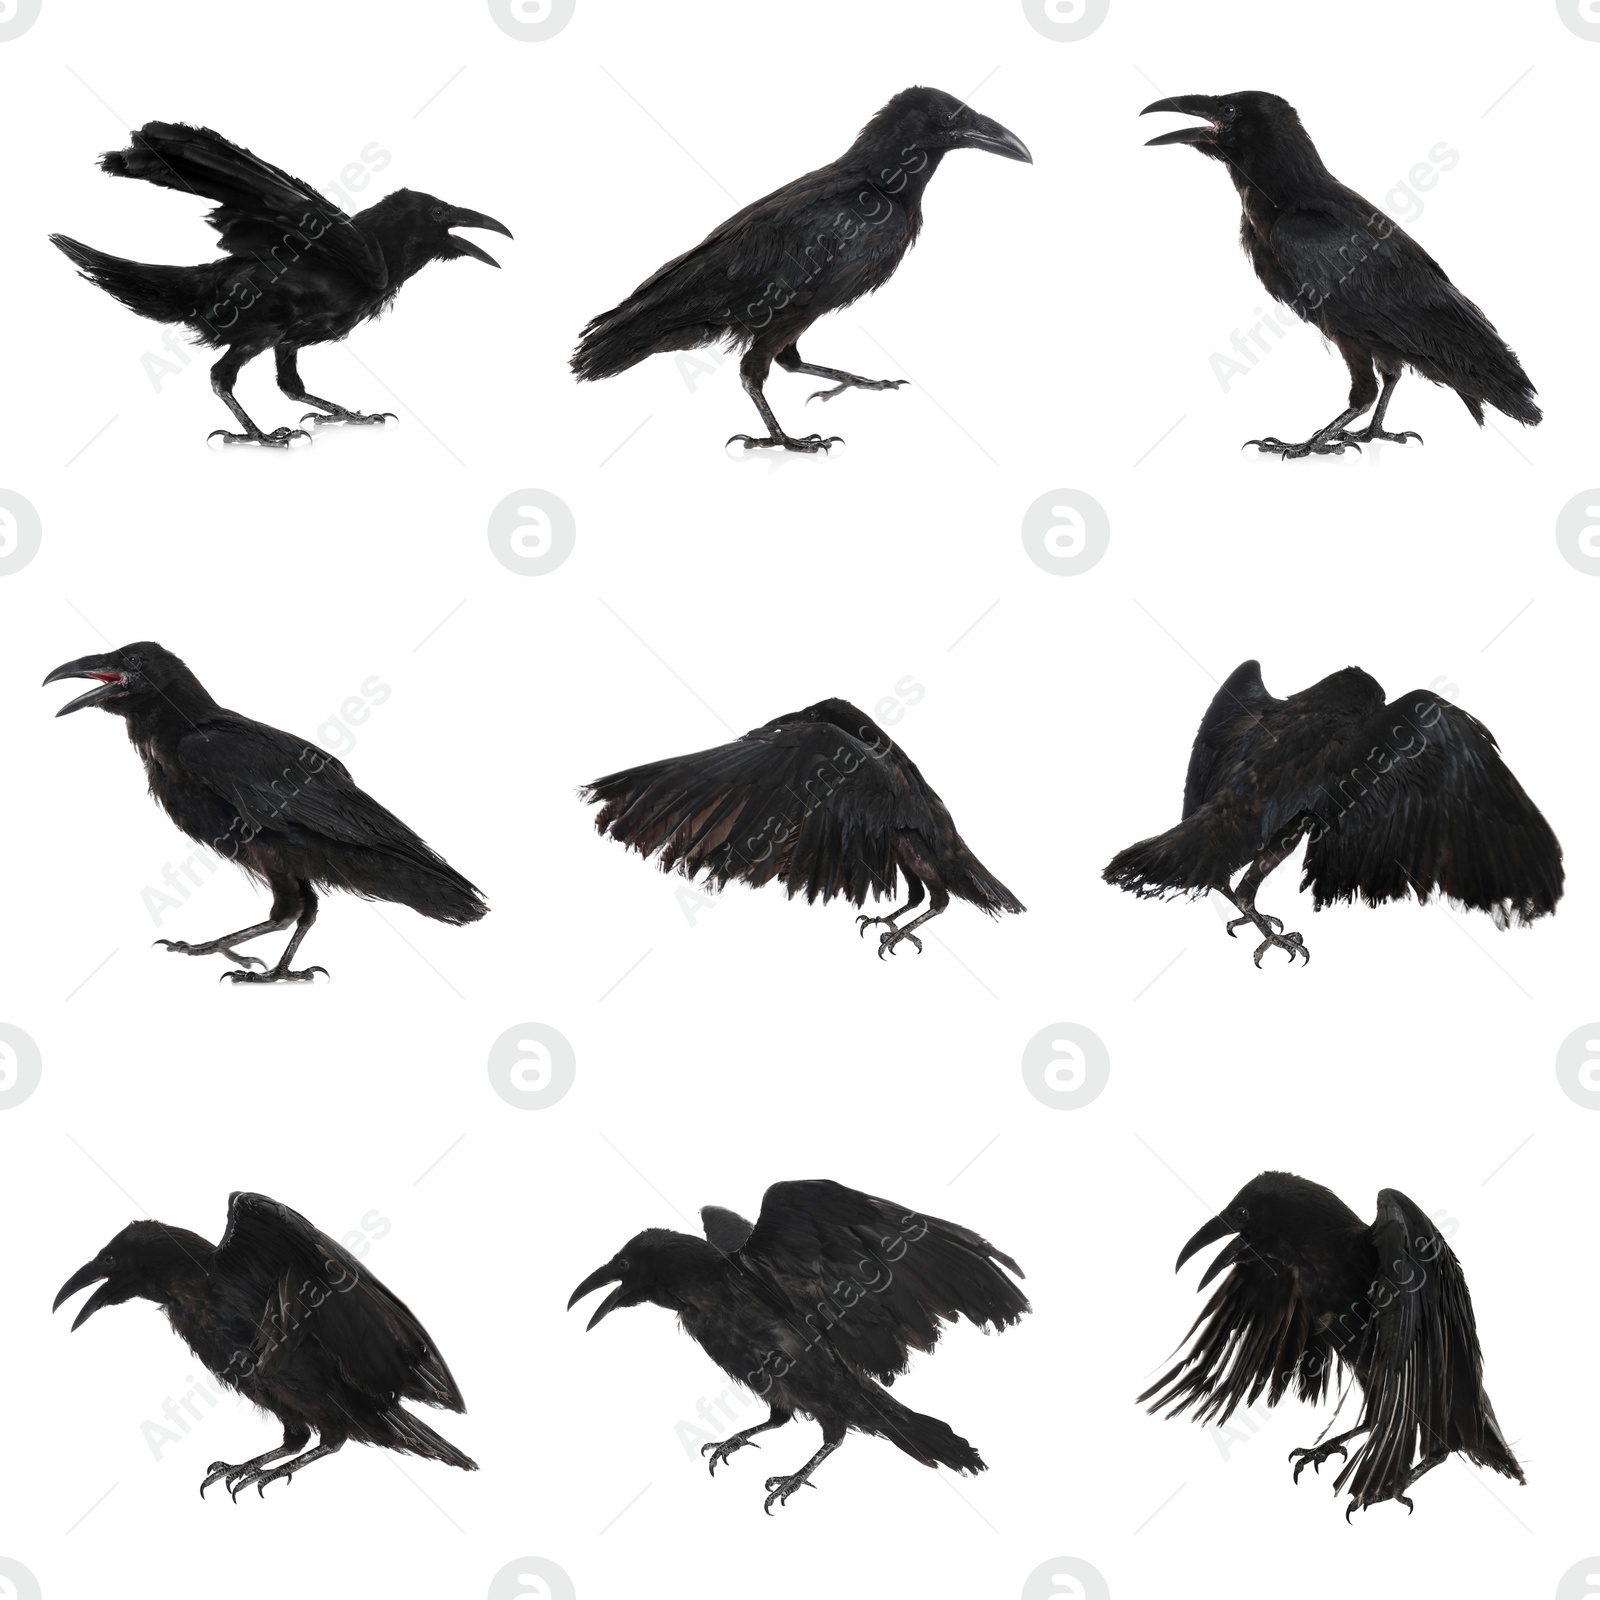 Image of Collage with black ravens on white background 